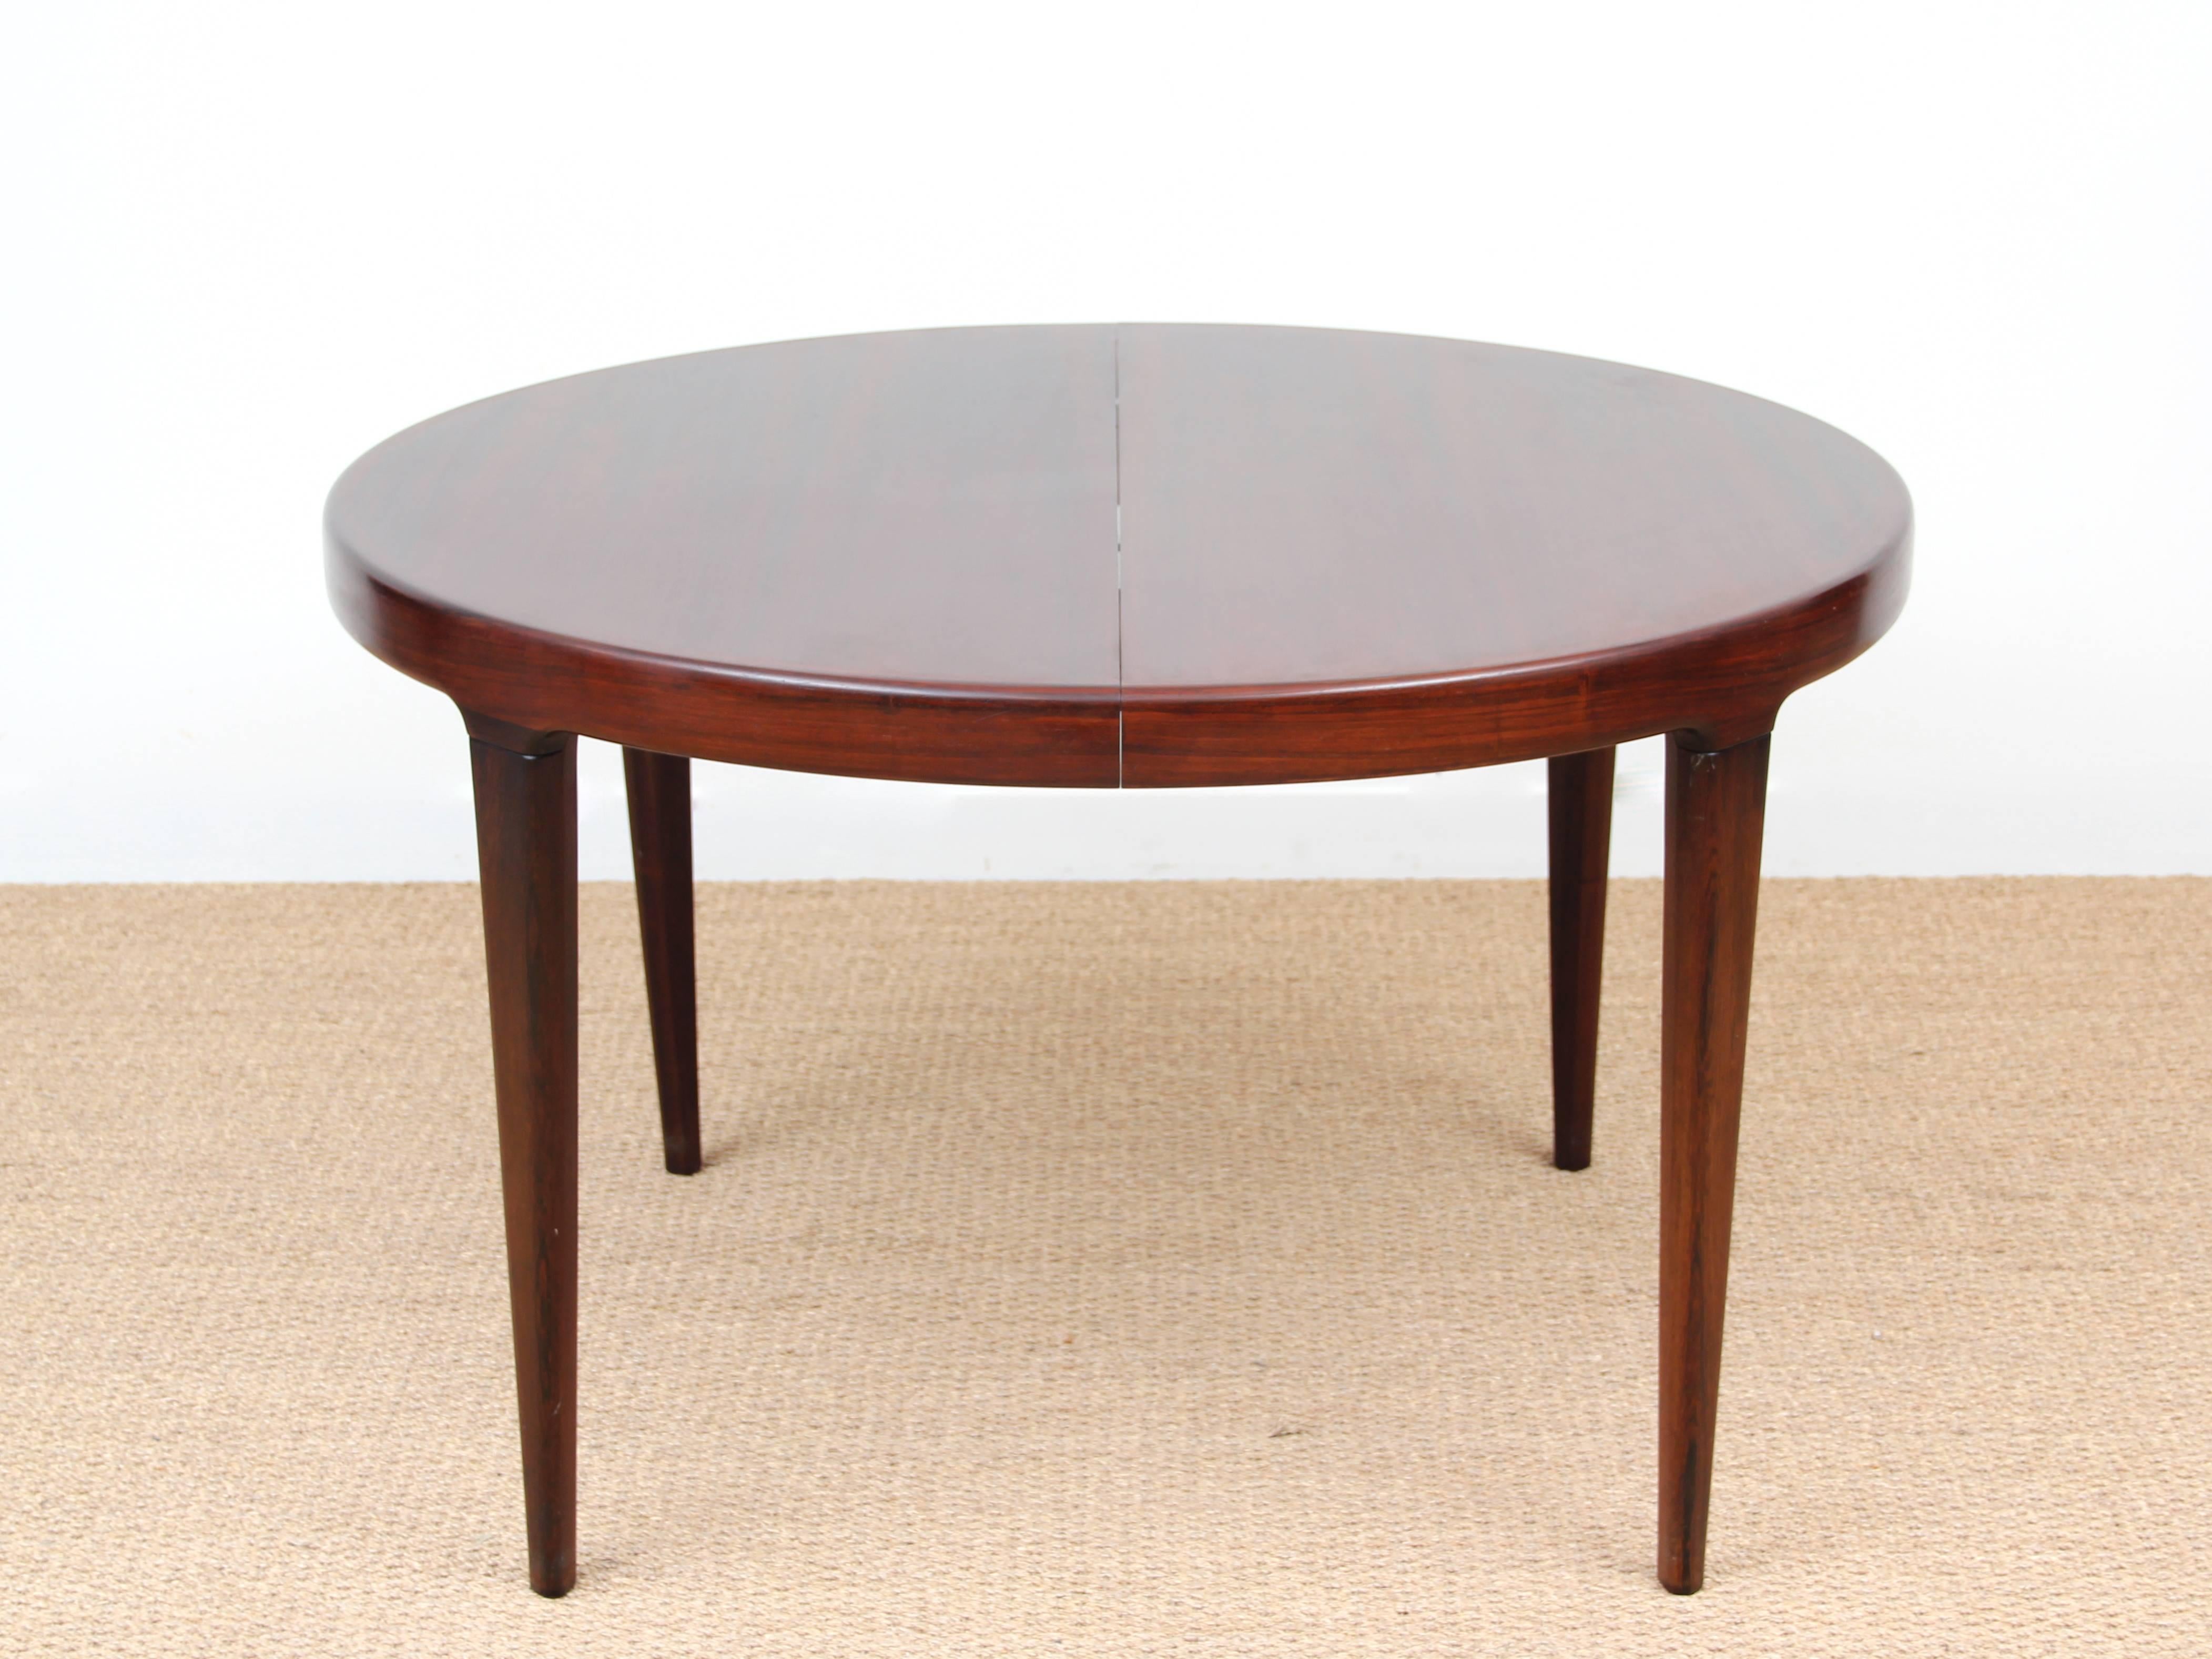 Scandinavian round dining table in rosewood for four to six people. One extension in white melamine. State original exceptional. Some small dents on the board.